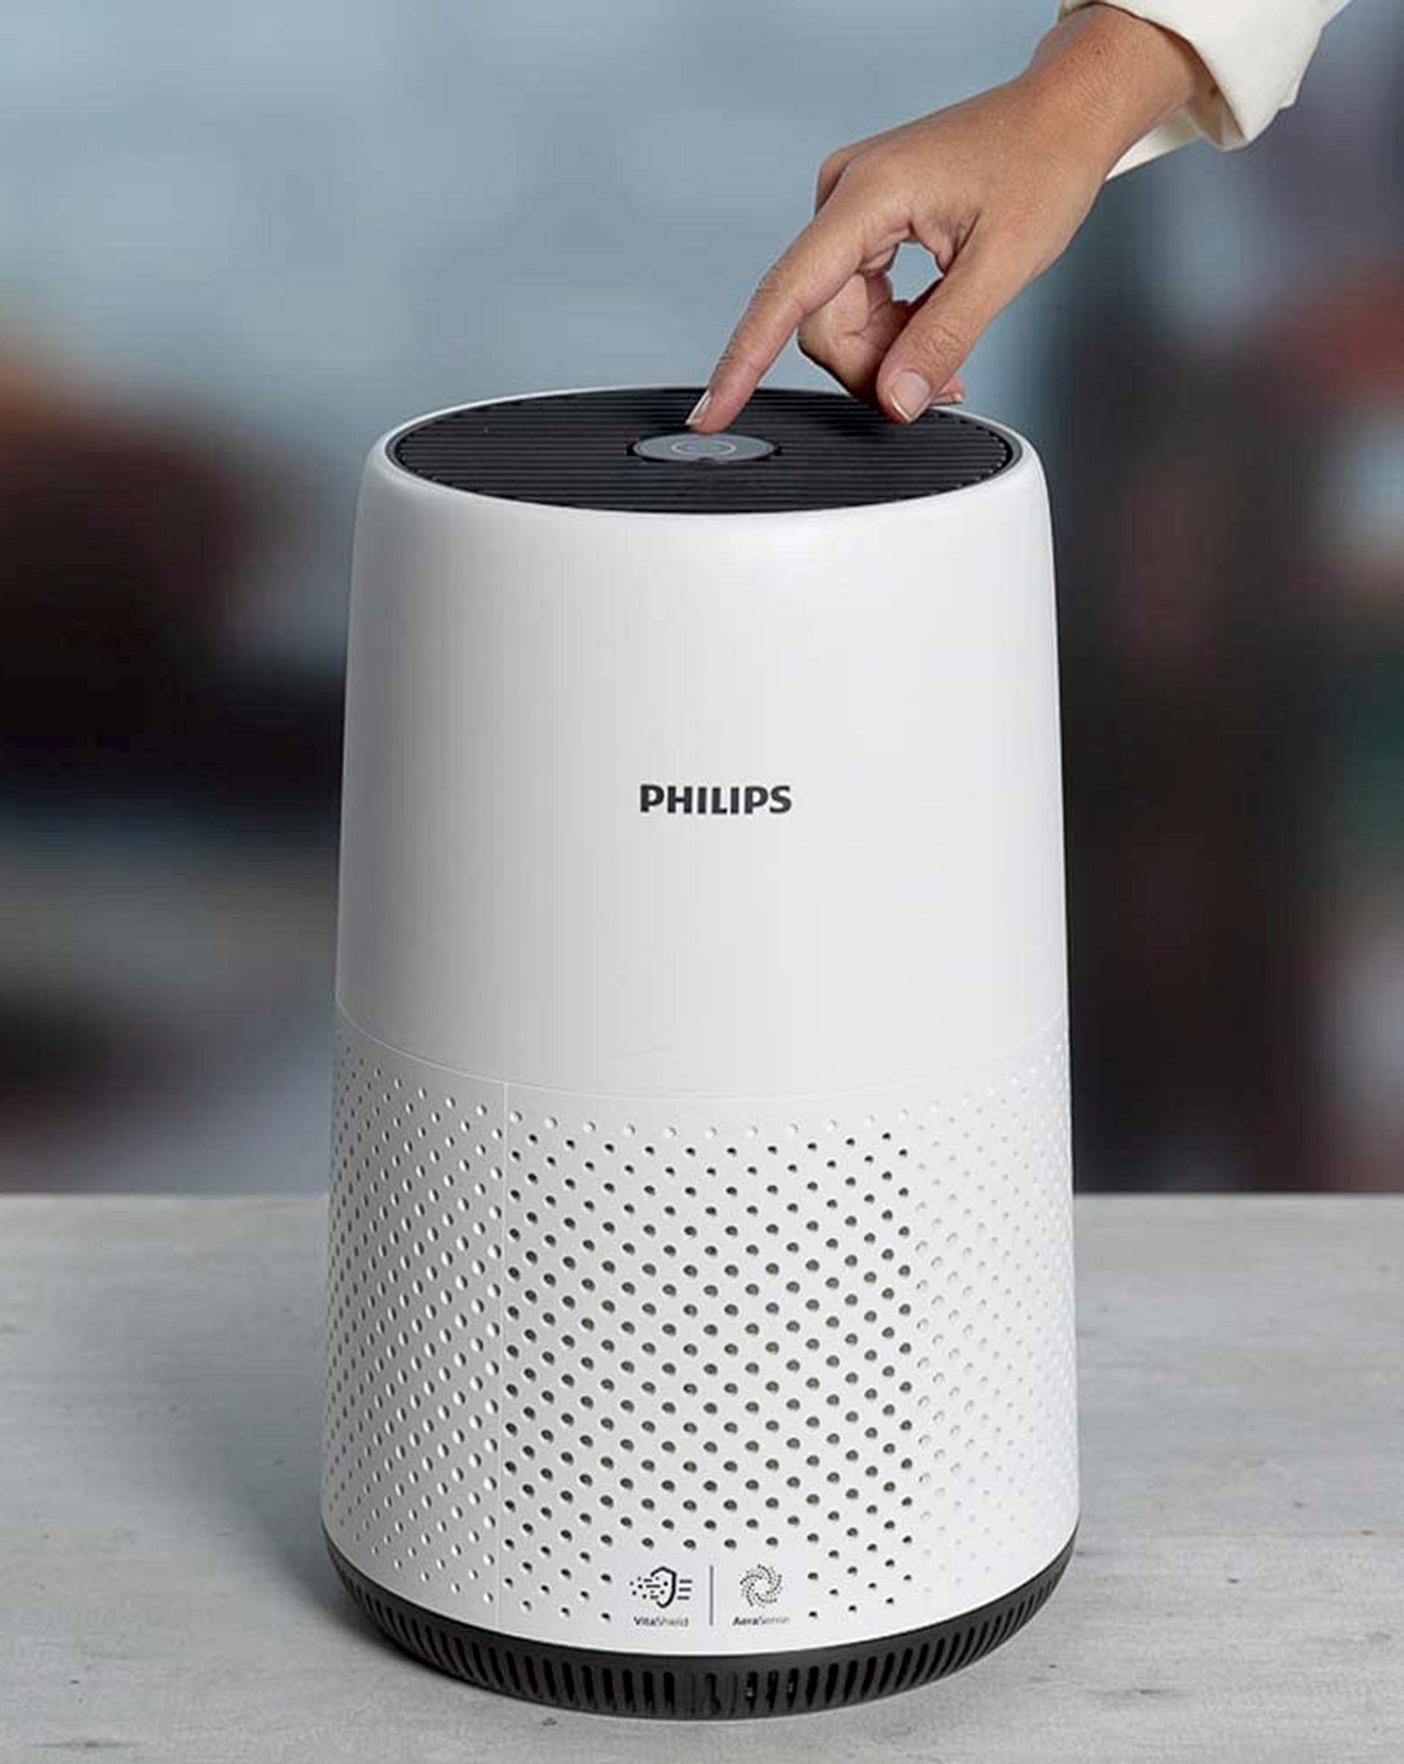 Philips 800 Compact Air Purifier